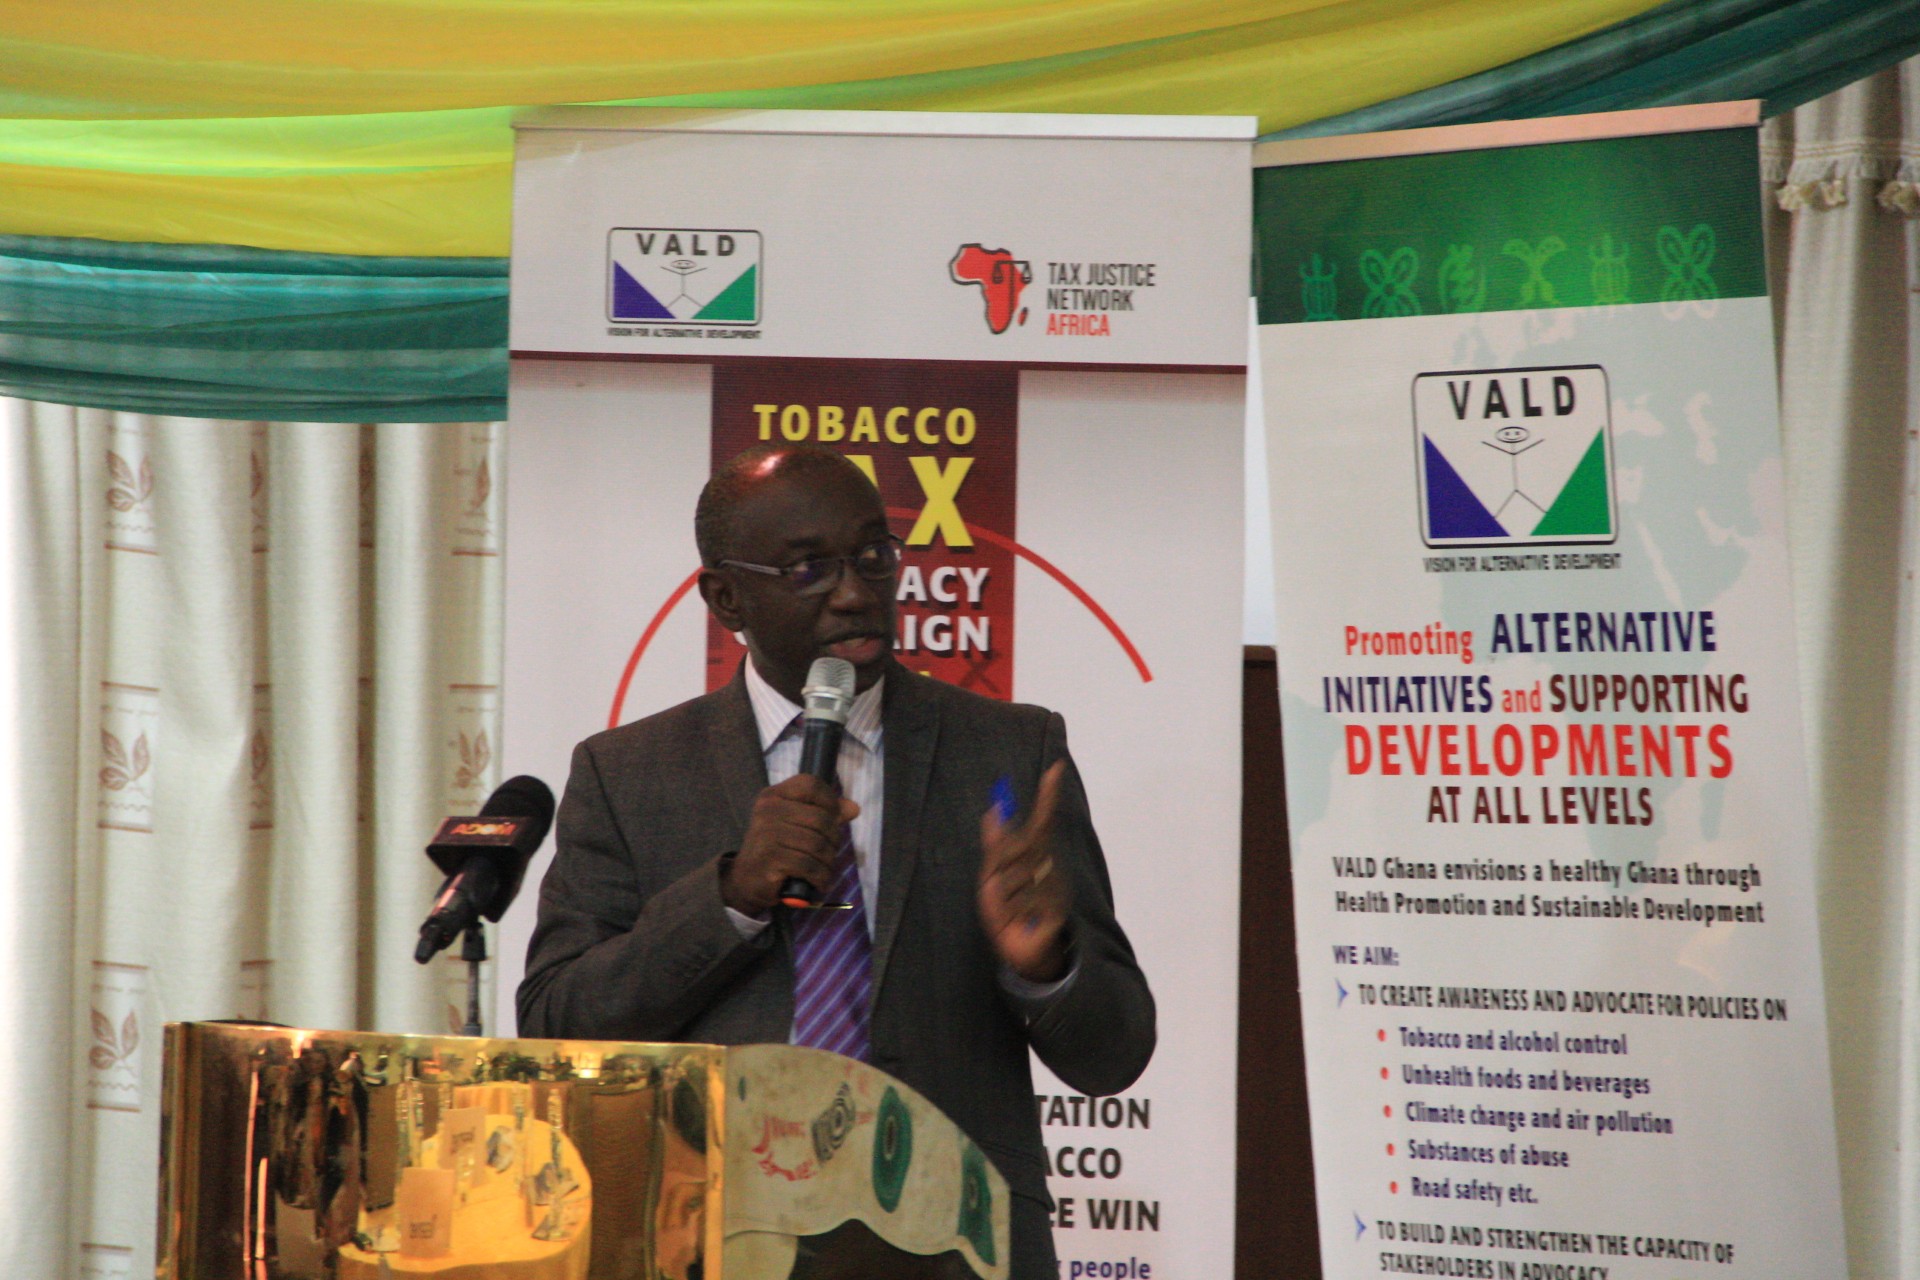 Health effects of tobacco and alcohol consumption alarming, intervention needed – Dean